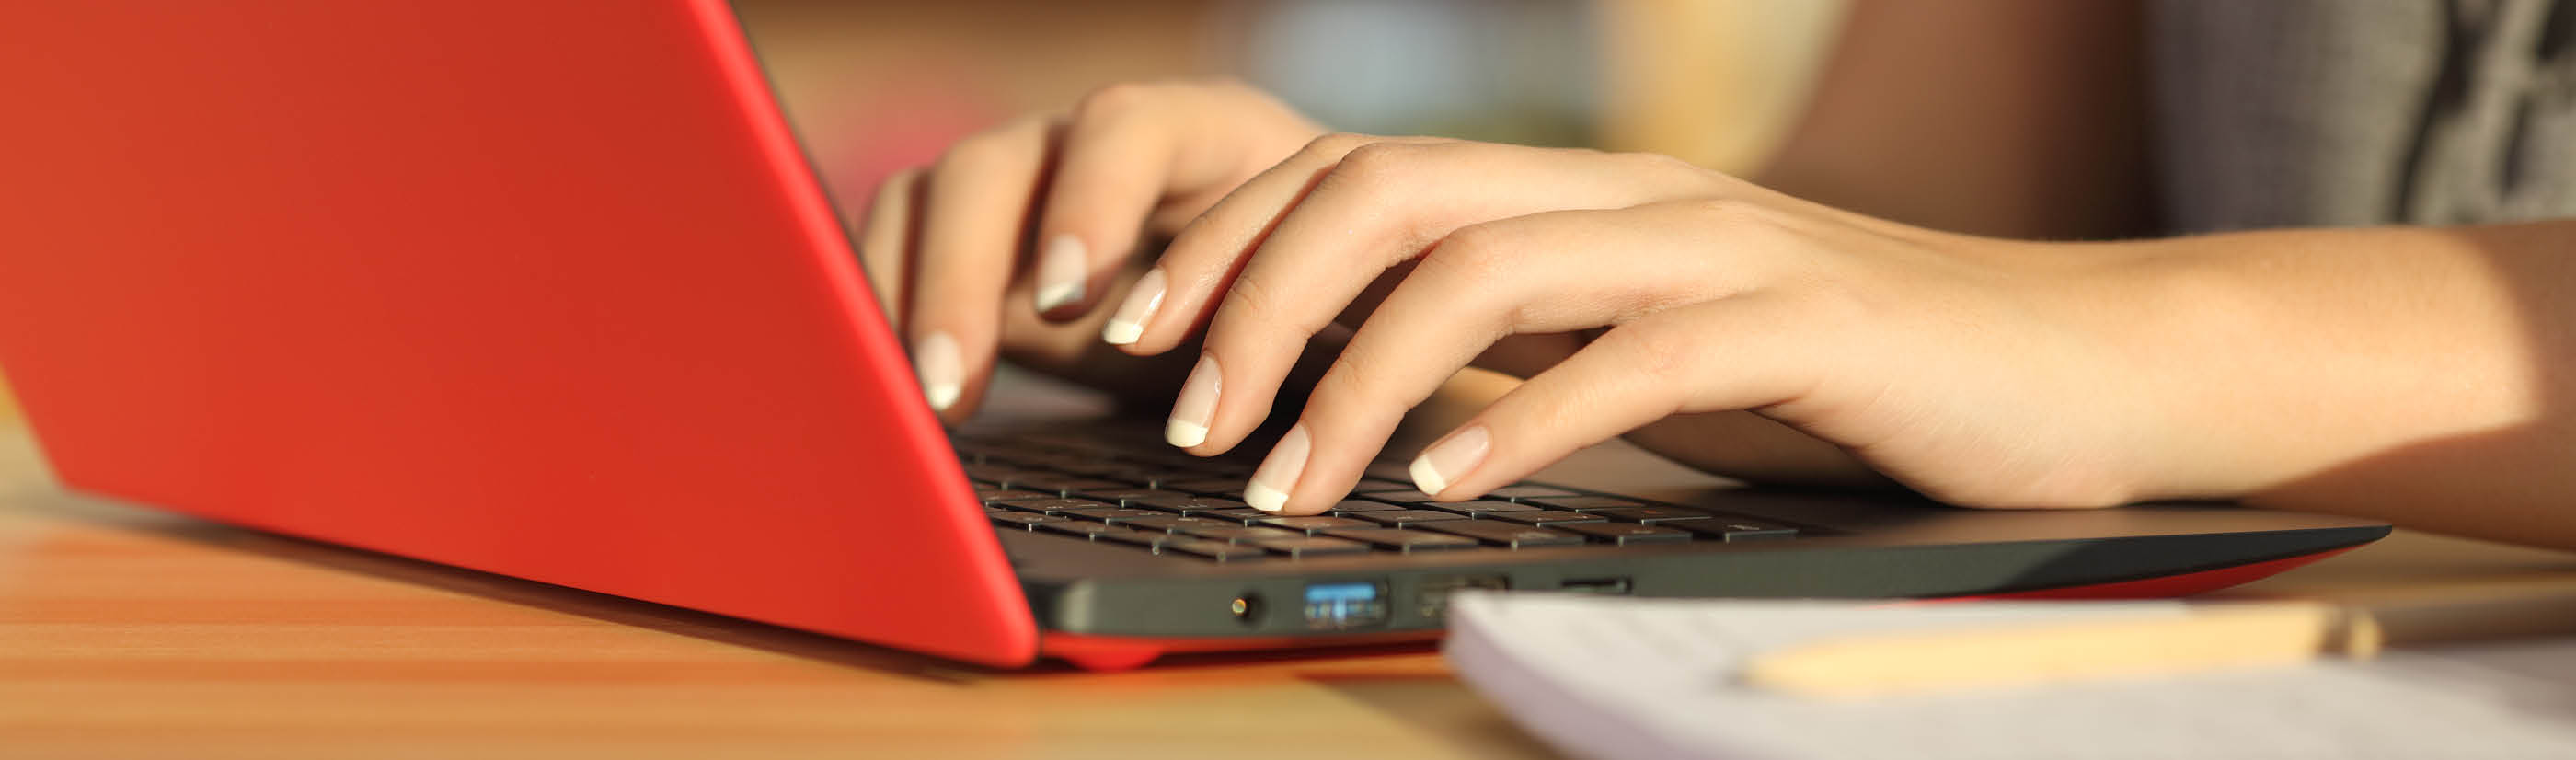 A person using a red laptop